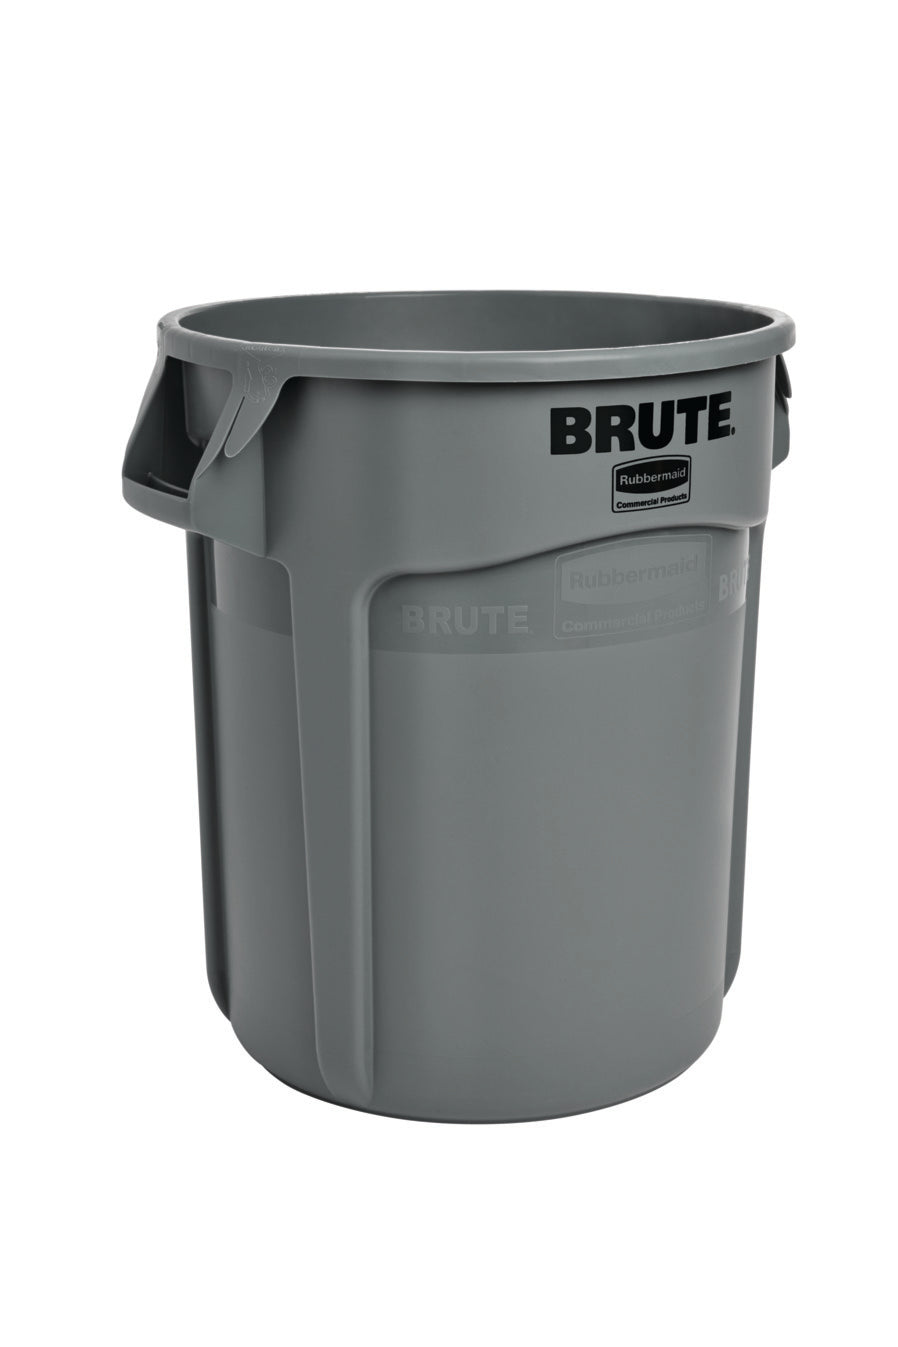 Rubbermaid Commercial Products Brute Container Branded-1 Count-6/Case